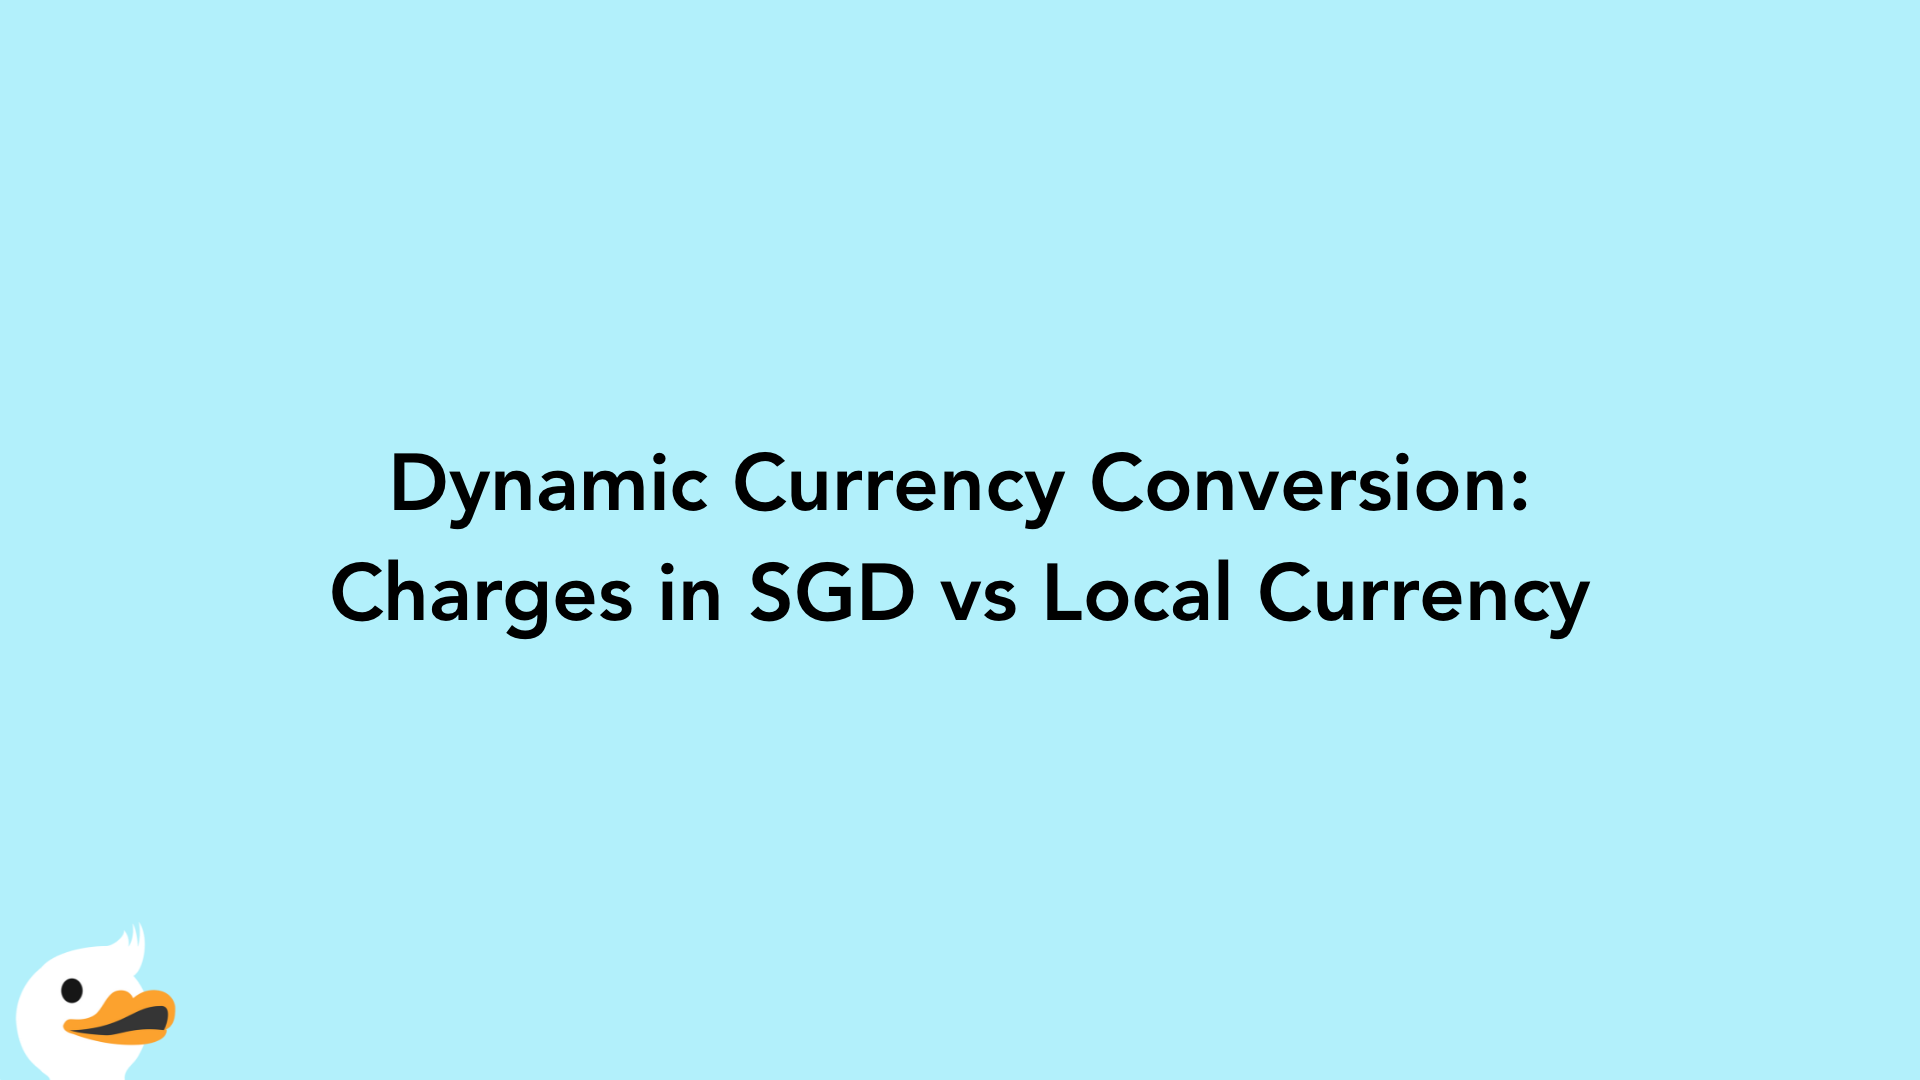 Dynamic Currency Conversion: Charges in SGD vs Local Currency